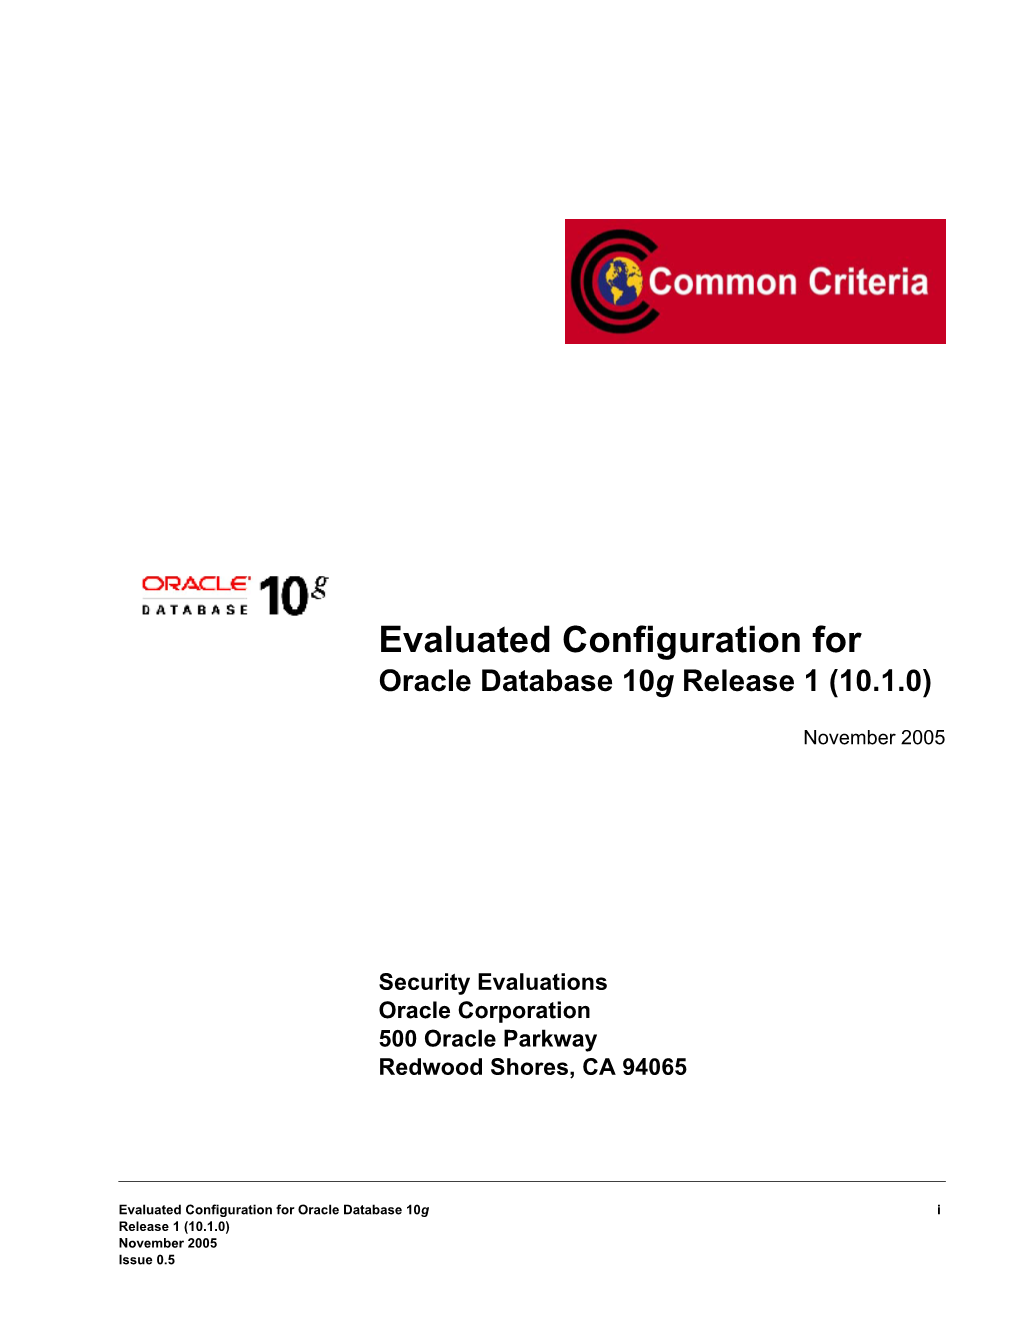 Evaluated Configuration for Oracle Database 10G Release 1 (10.1.0)